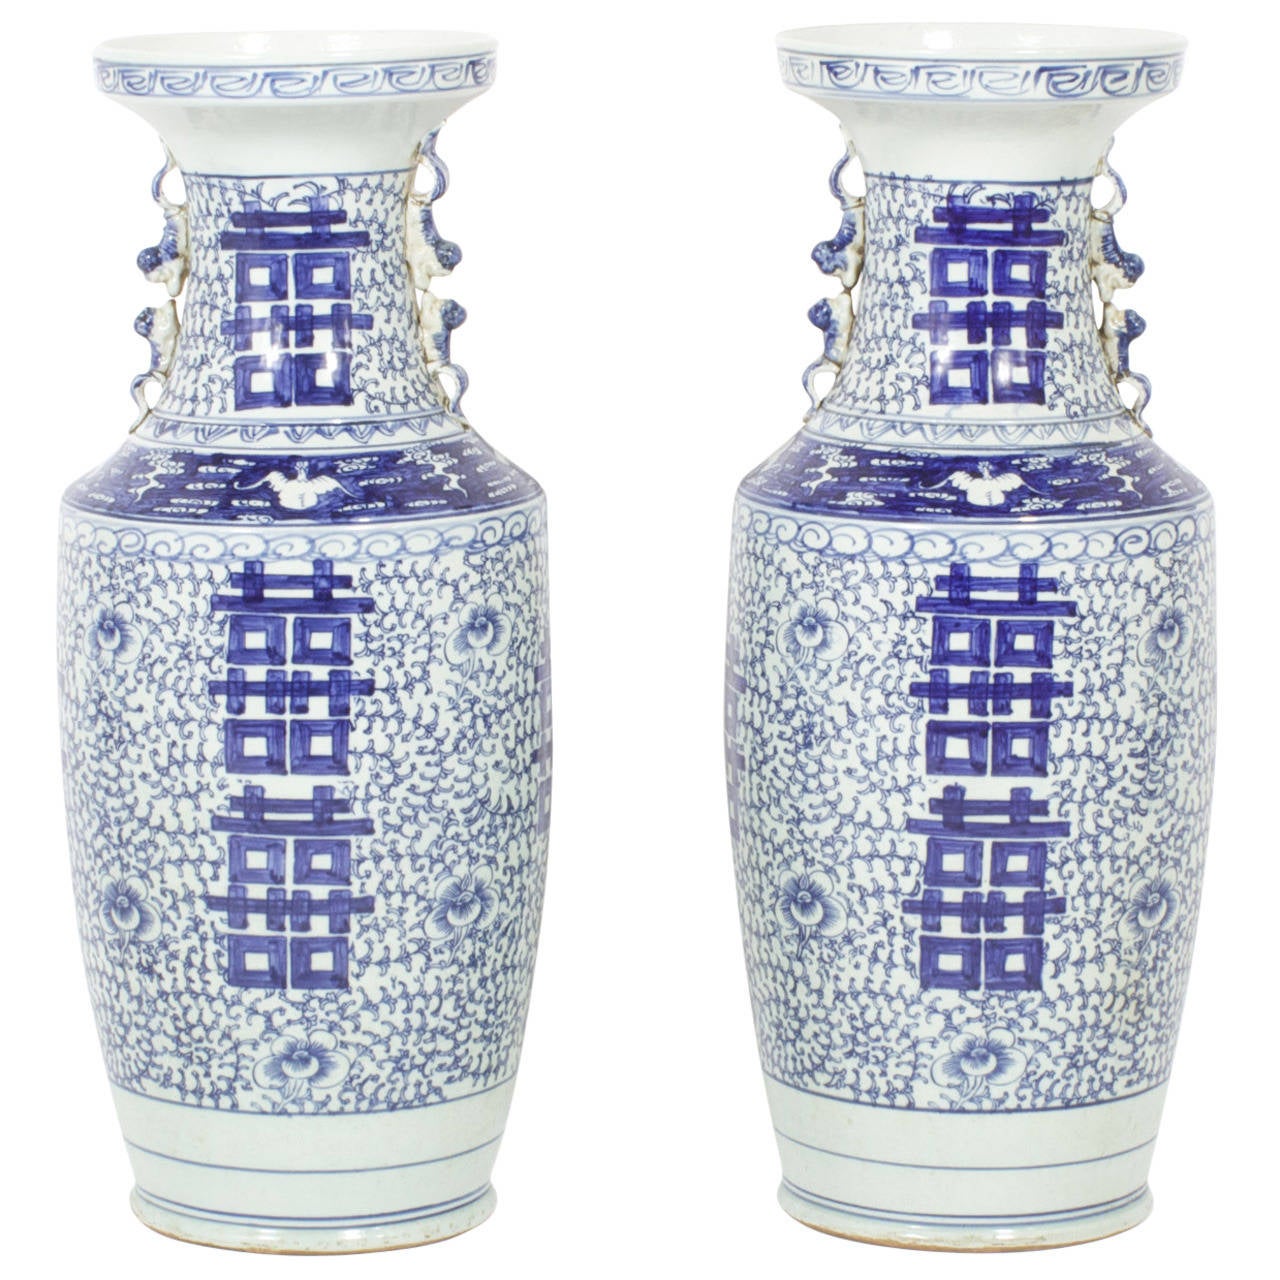 Pair of Large Blue and White Chinese Porcelain Vases at 1stdibs